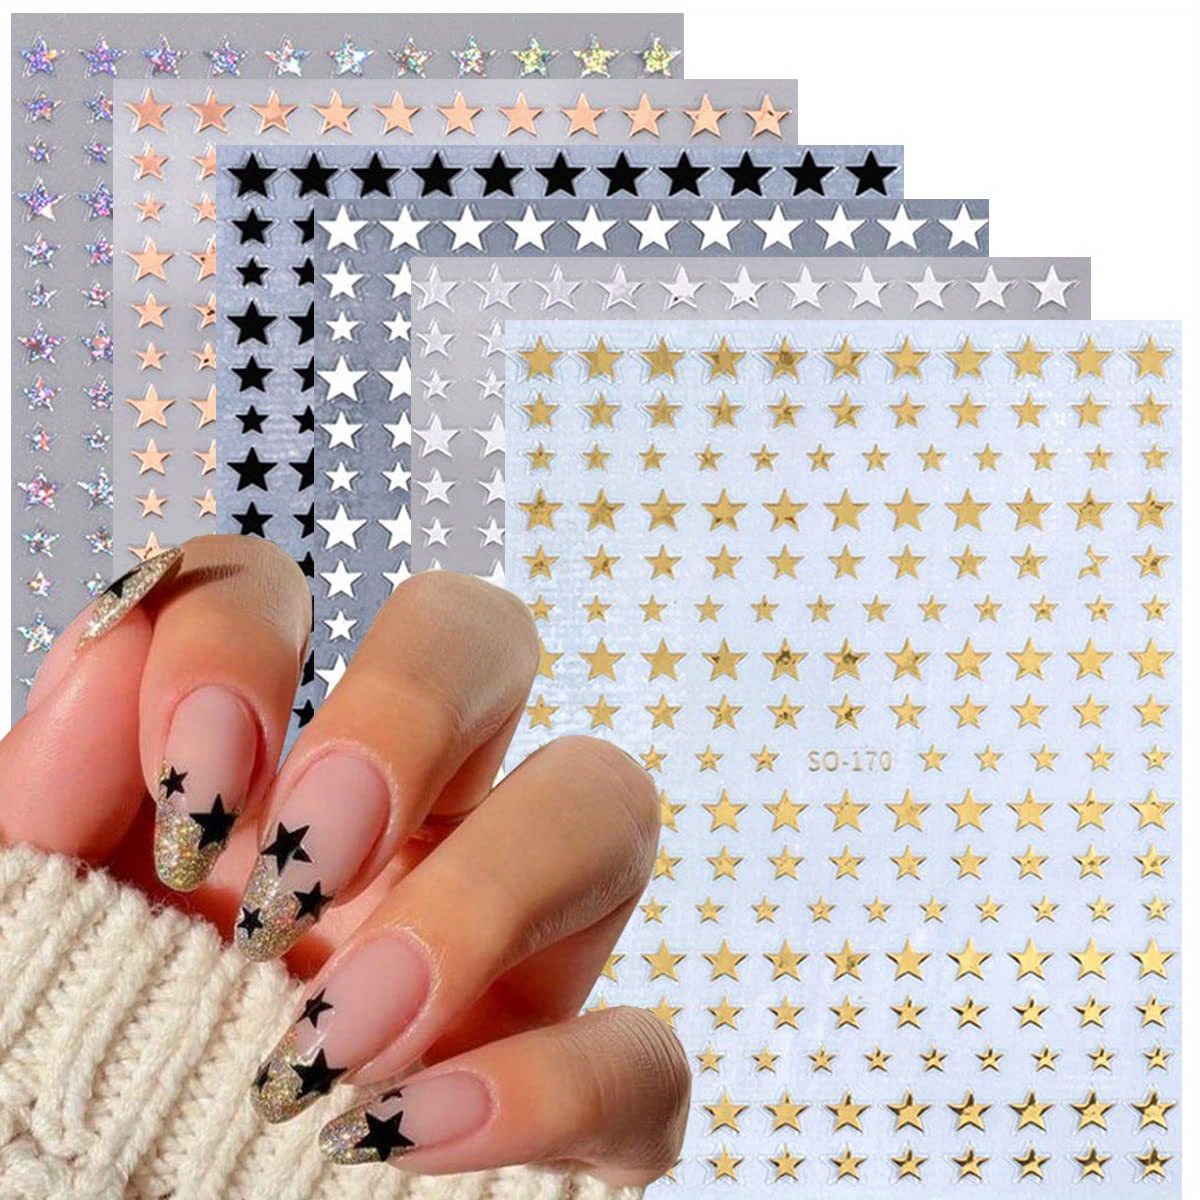 

6 Sheet Star Design Nail Art Stickers, Self Adhesive 3d Glitter Shiny Golden And Silvery Star Design Nail Art Decals For Nail Art Decoration,nail Art Supplies For Women And Girls